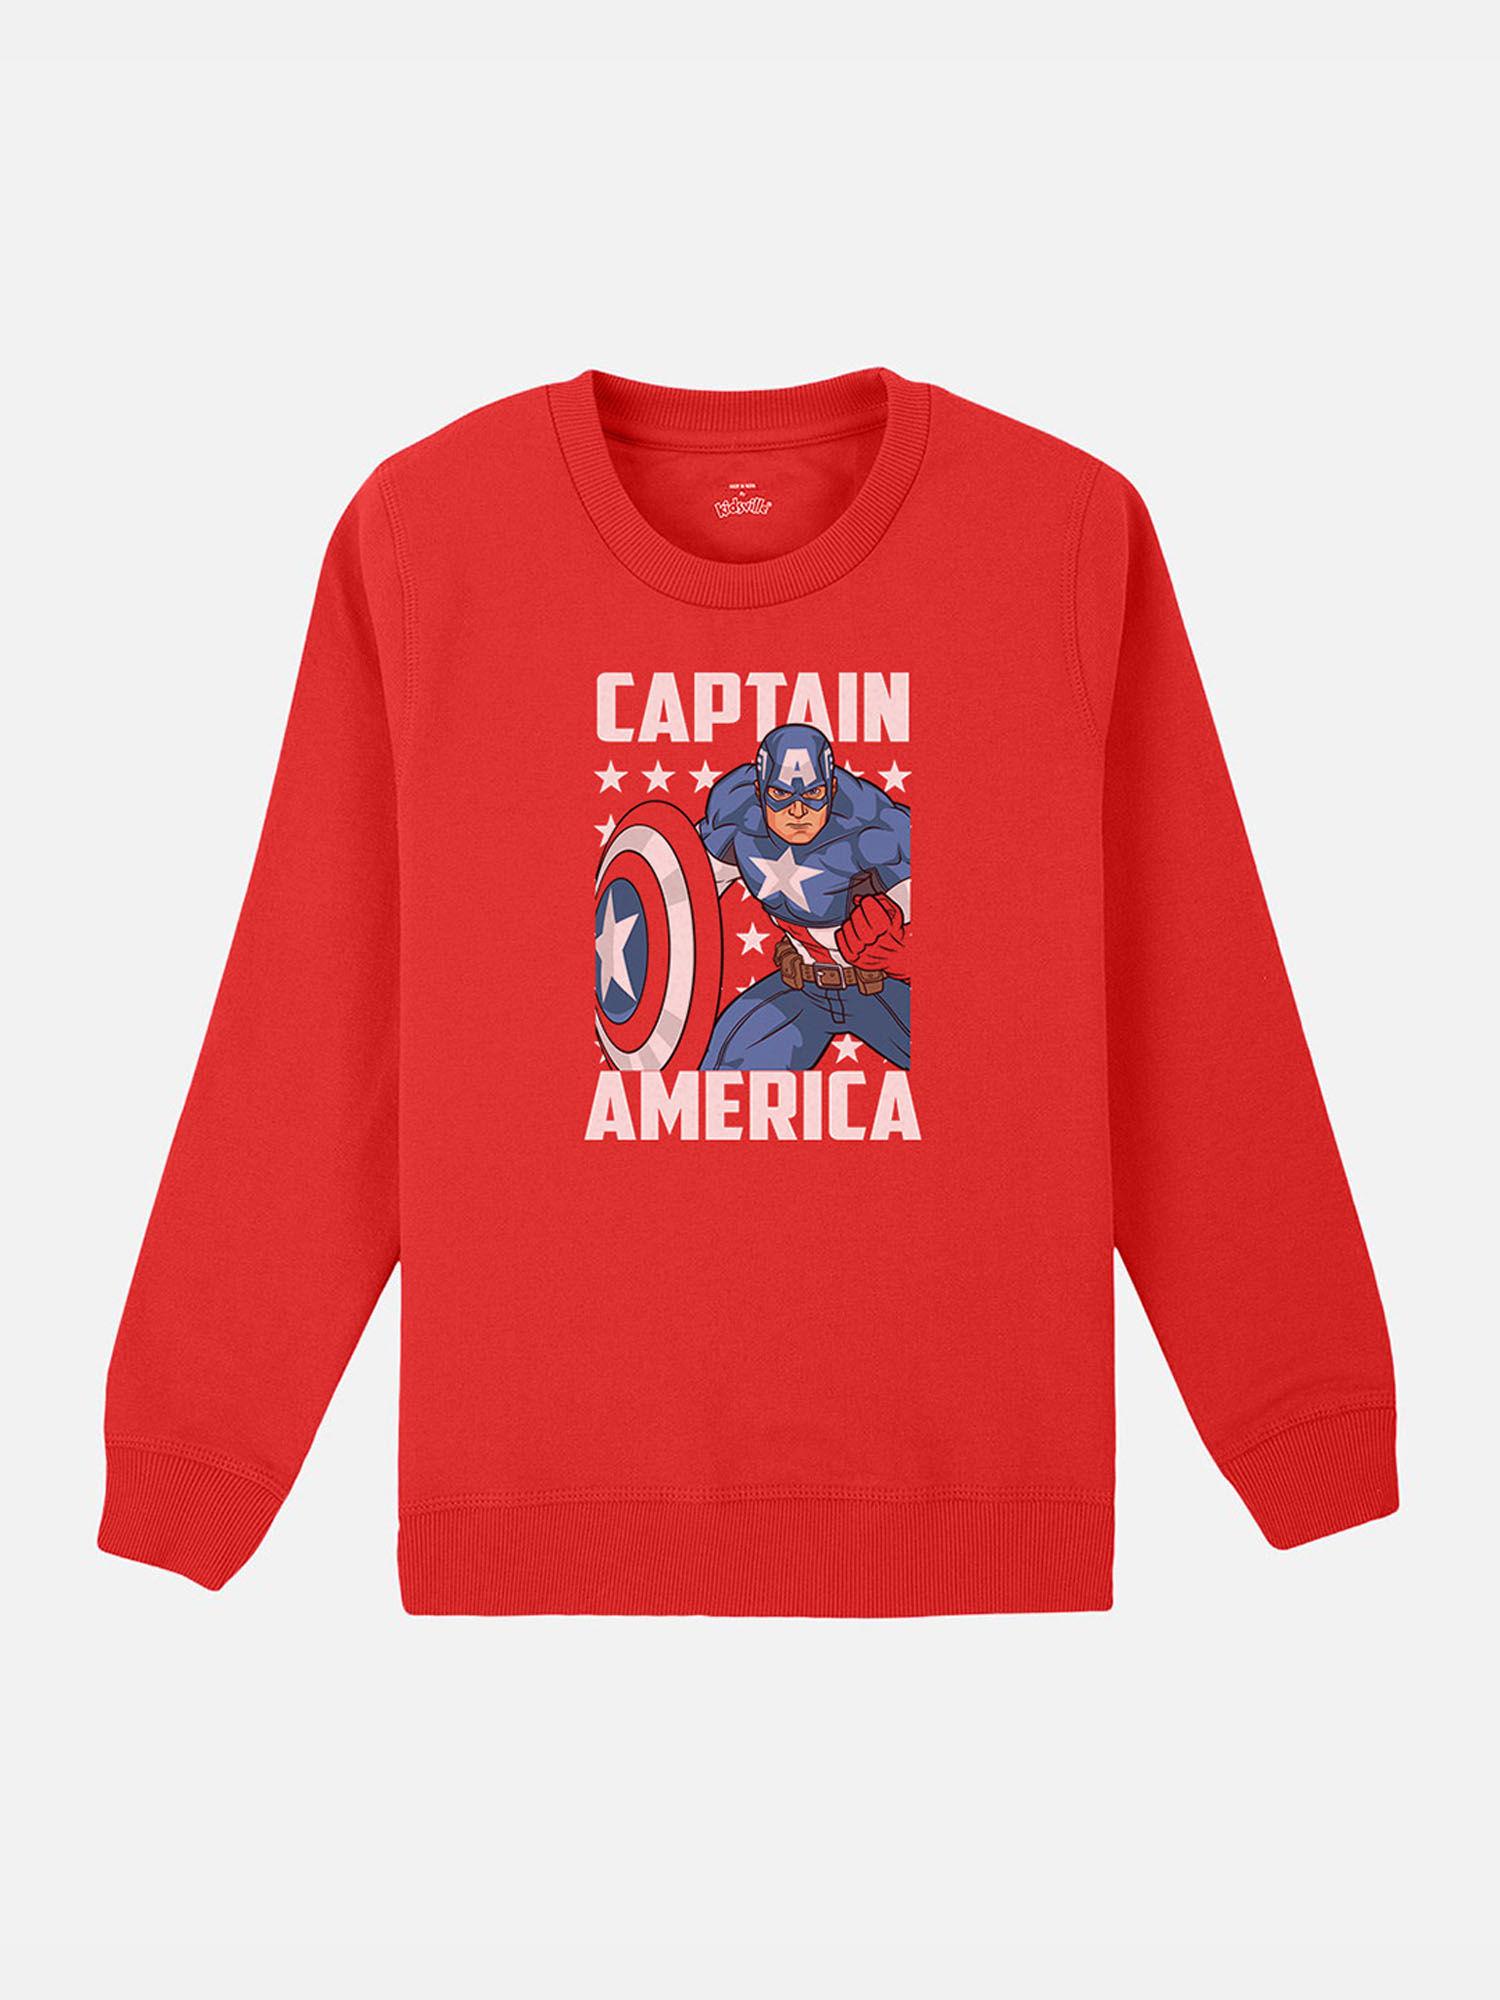 captain america printed red full sleeve sweater